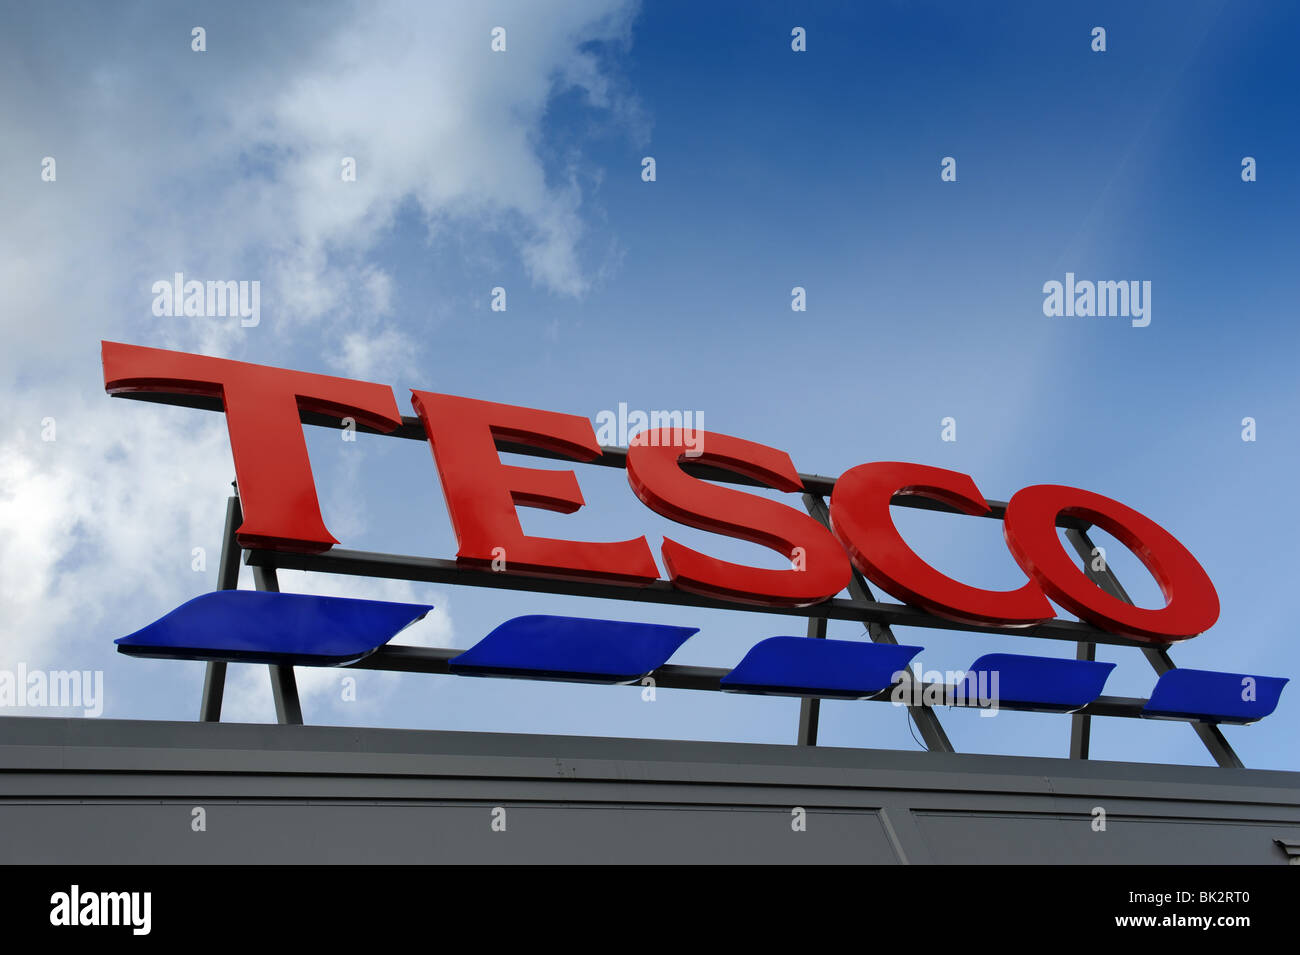 Tesco supermarket sign at The town of Ellesmere in north Shropshire uk Stock Photo